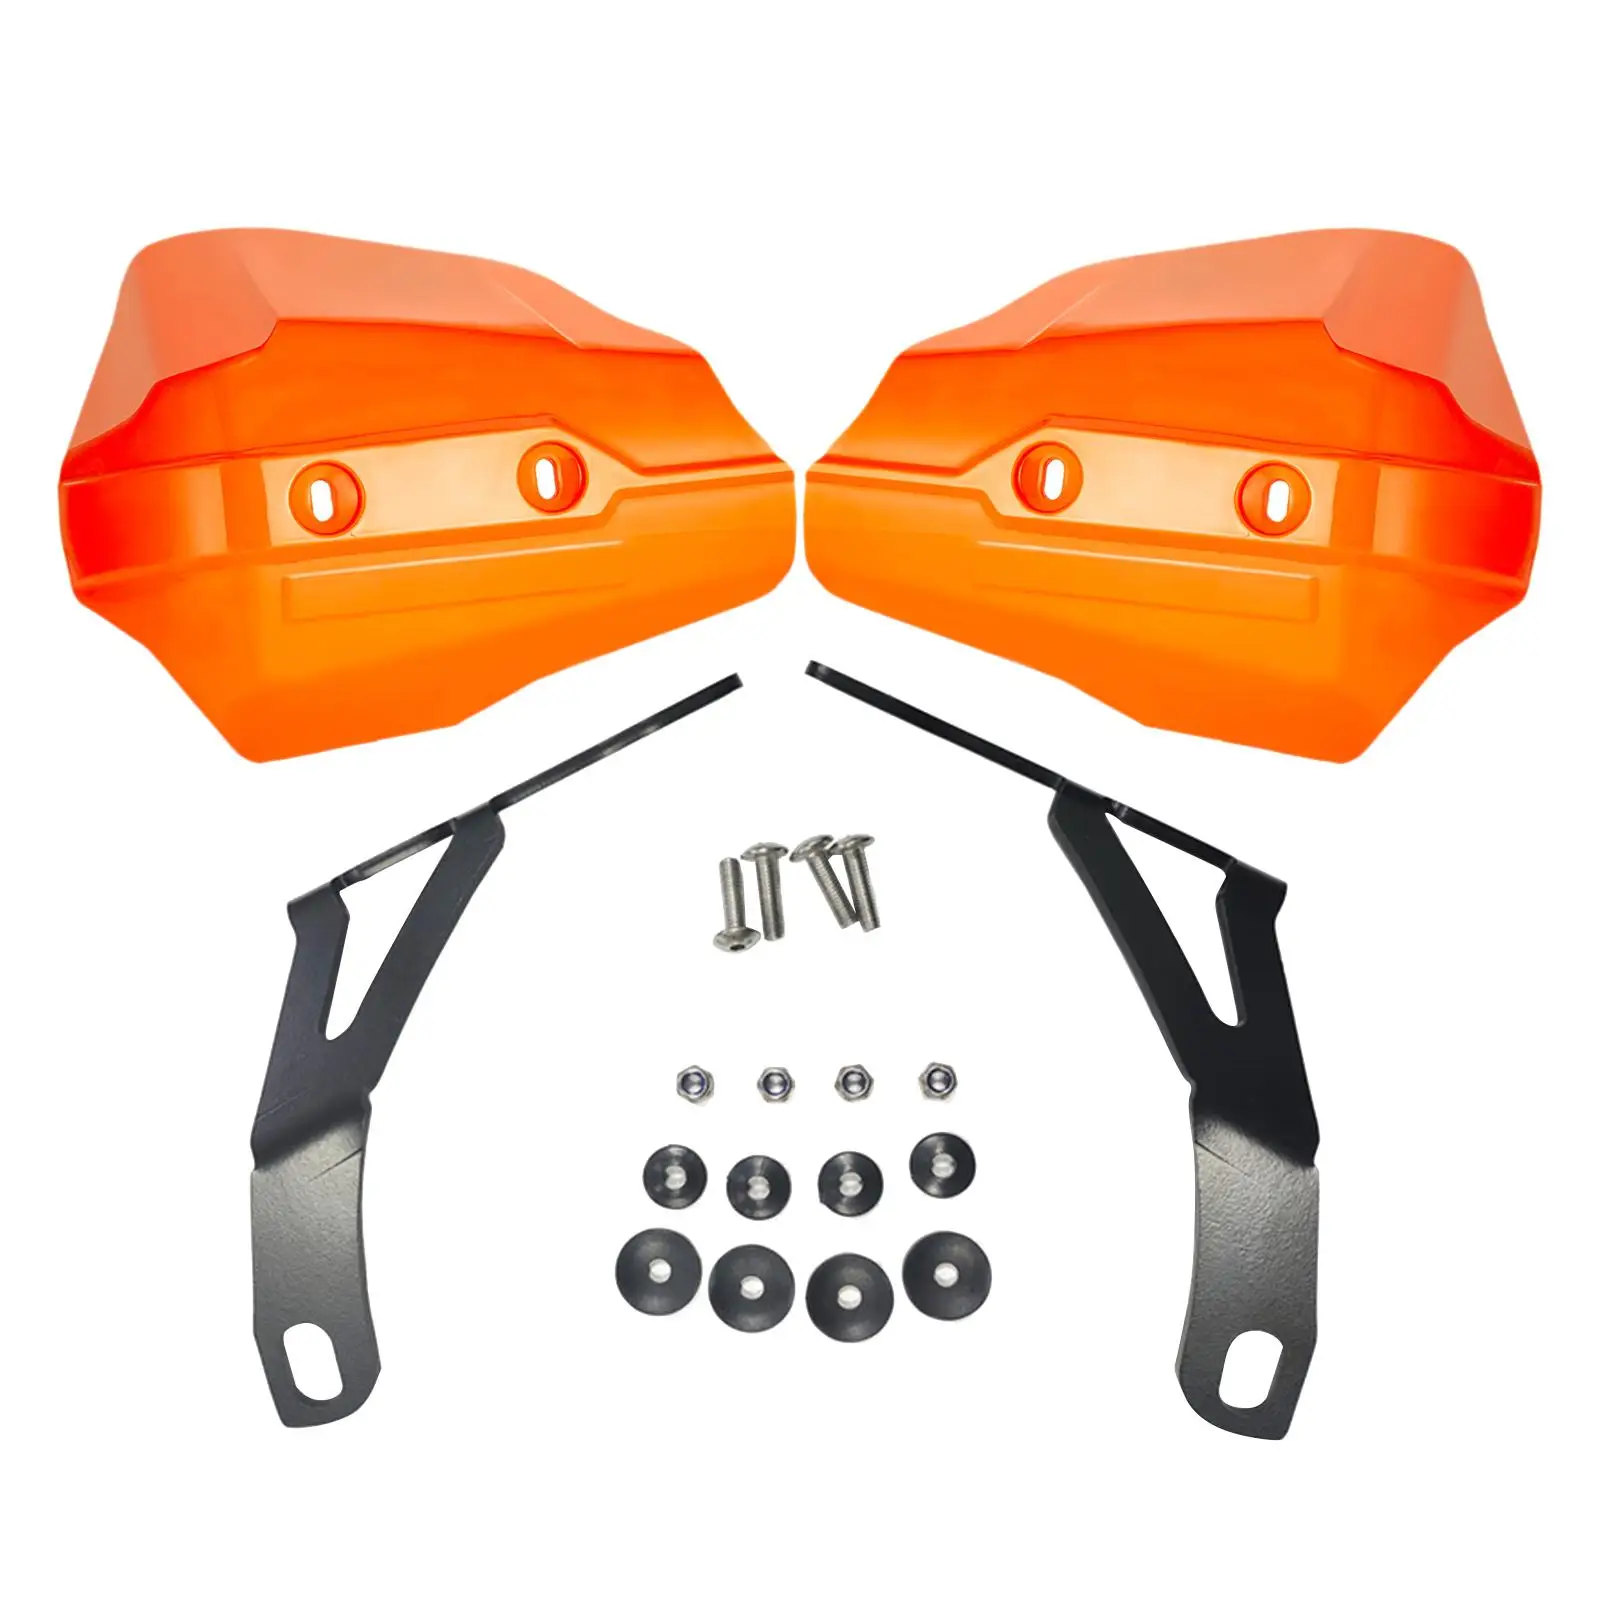 2Pcs Large Motorcycle Handguards Wind Protector Motorcycle Accessories